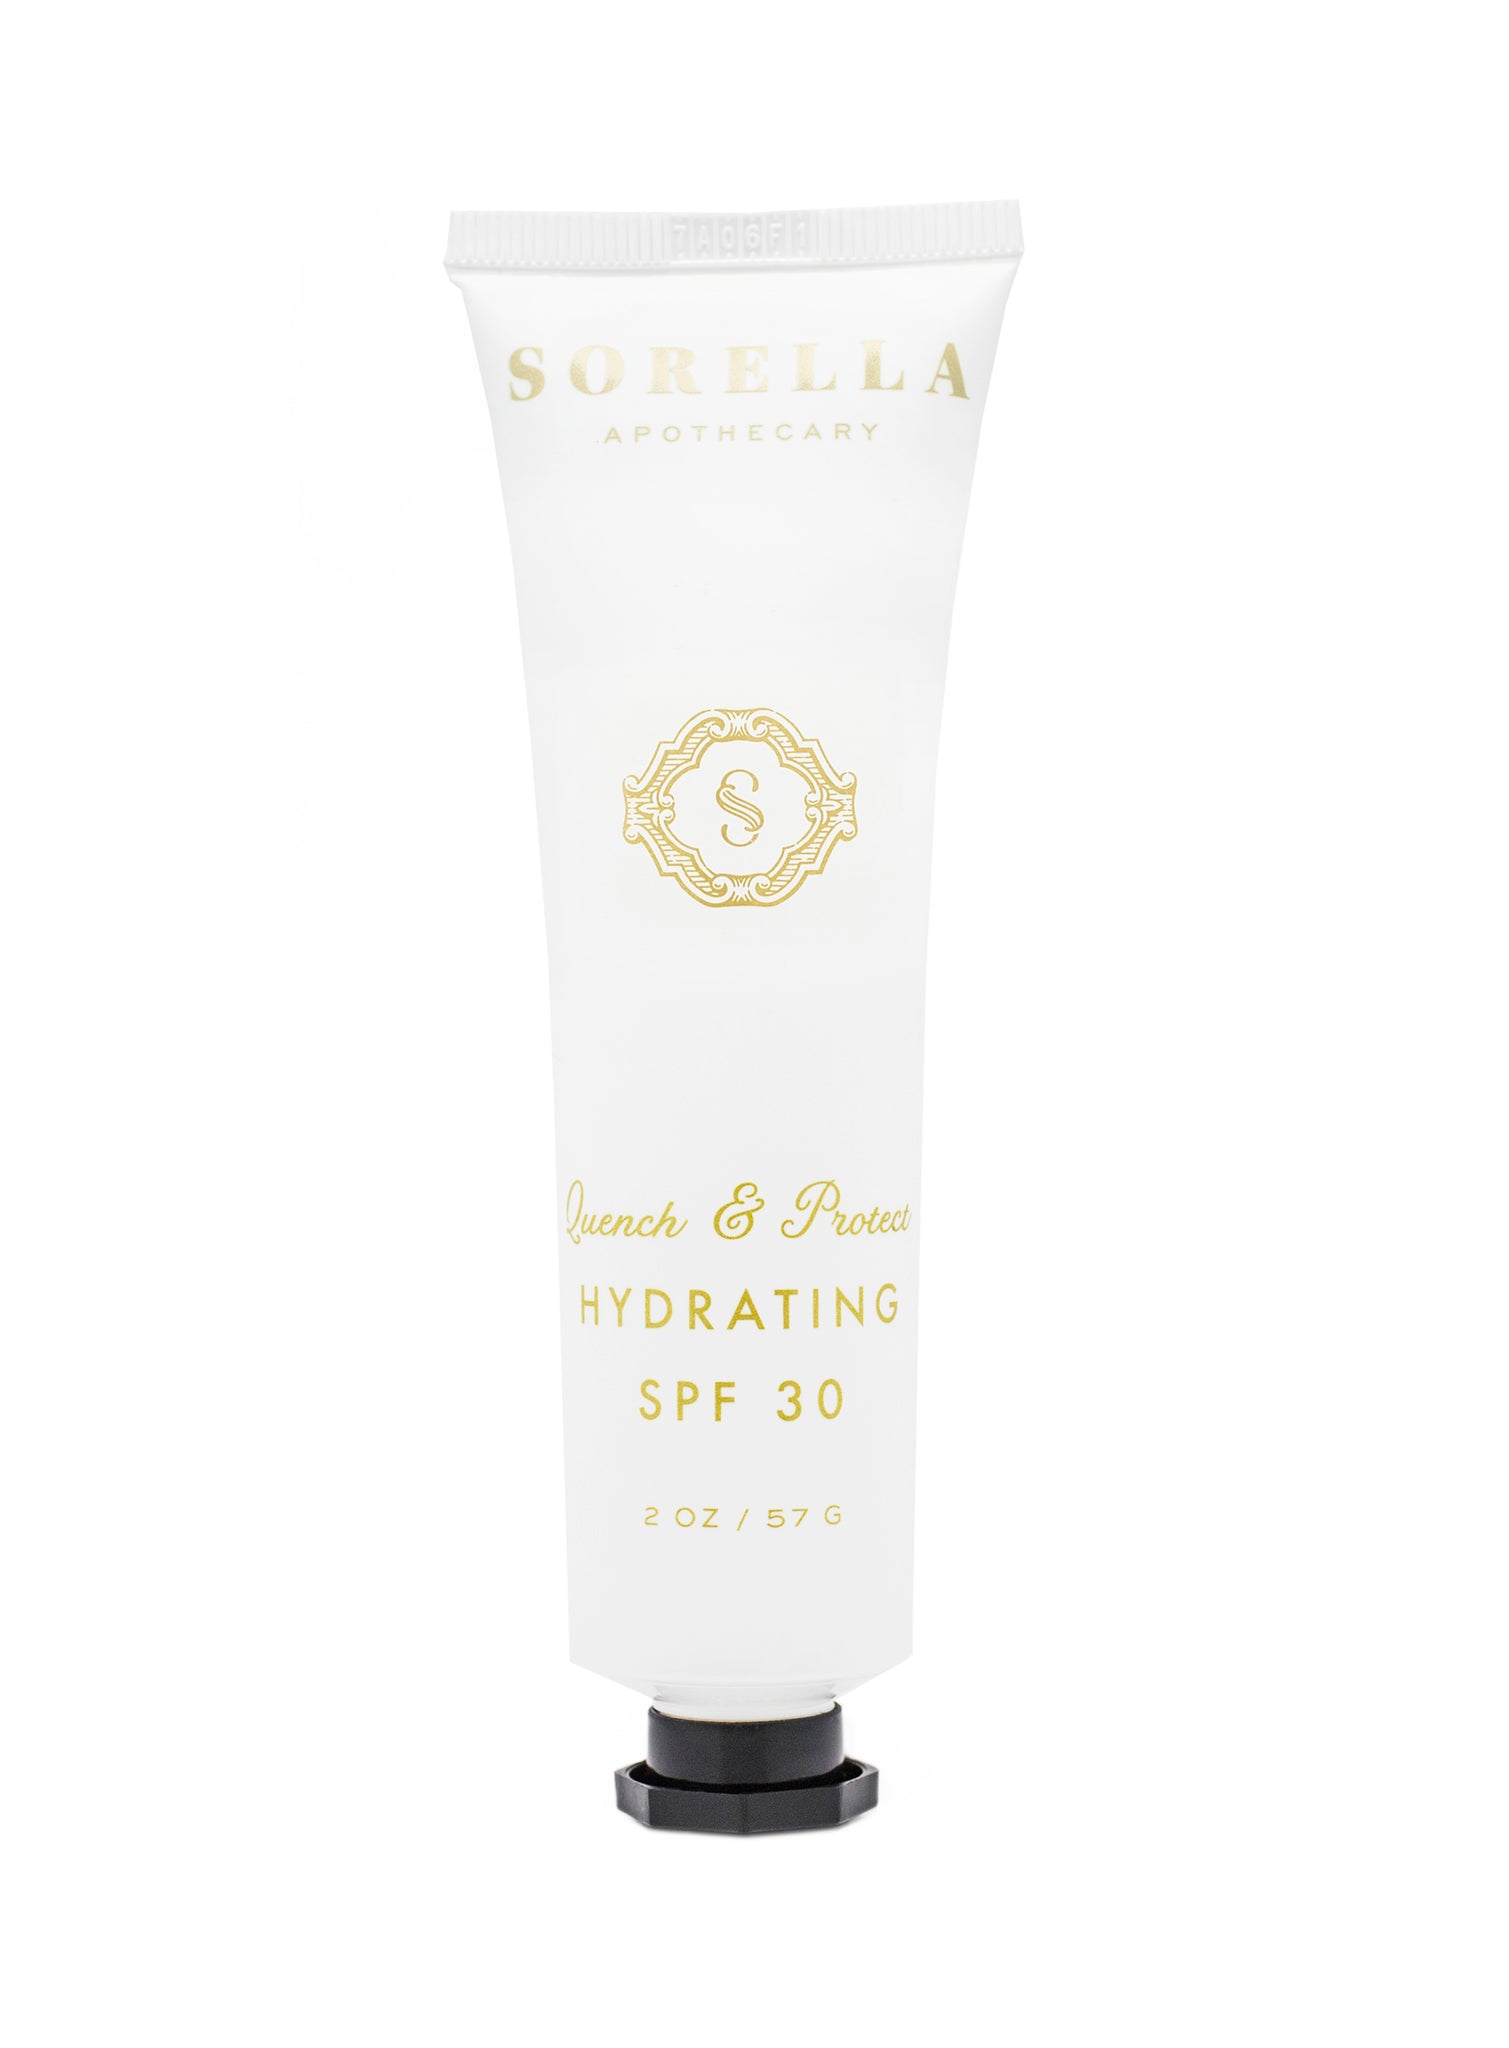 QUENCH & PROTECT HYDRATING SPF 30